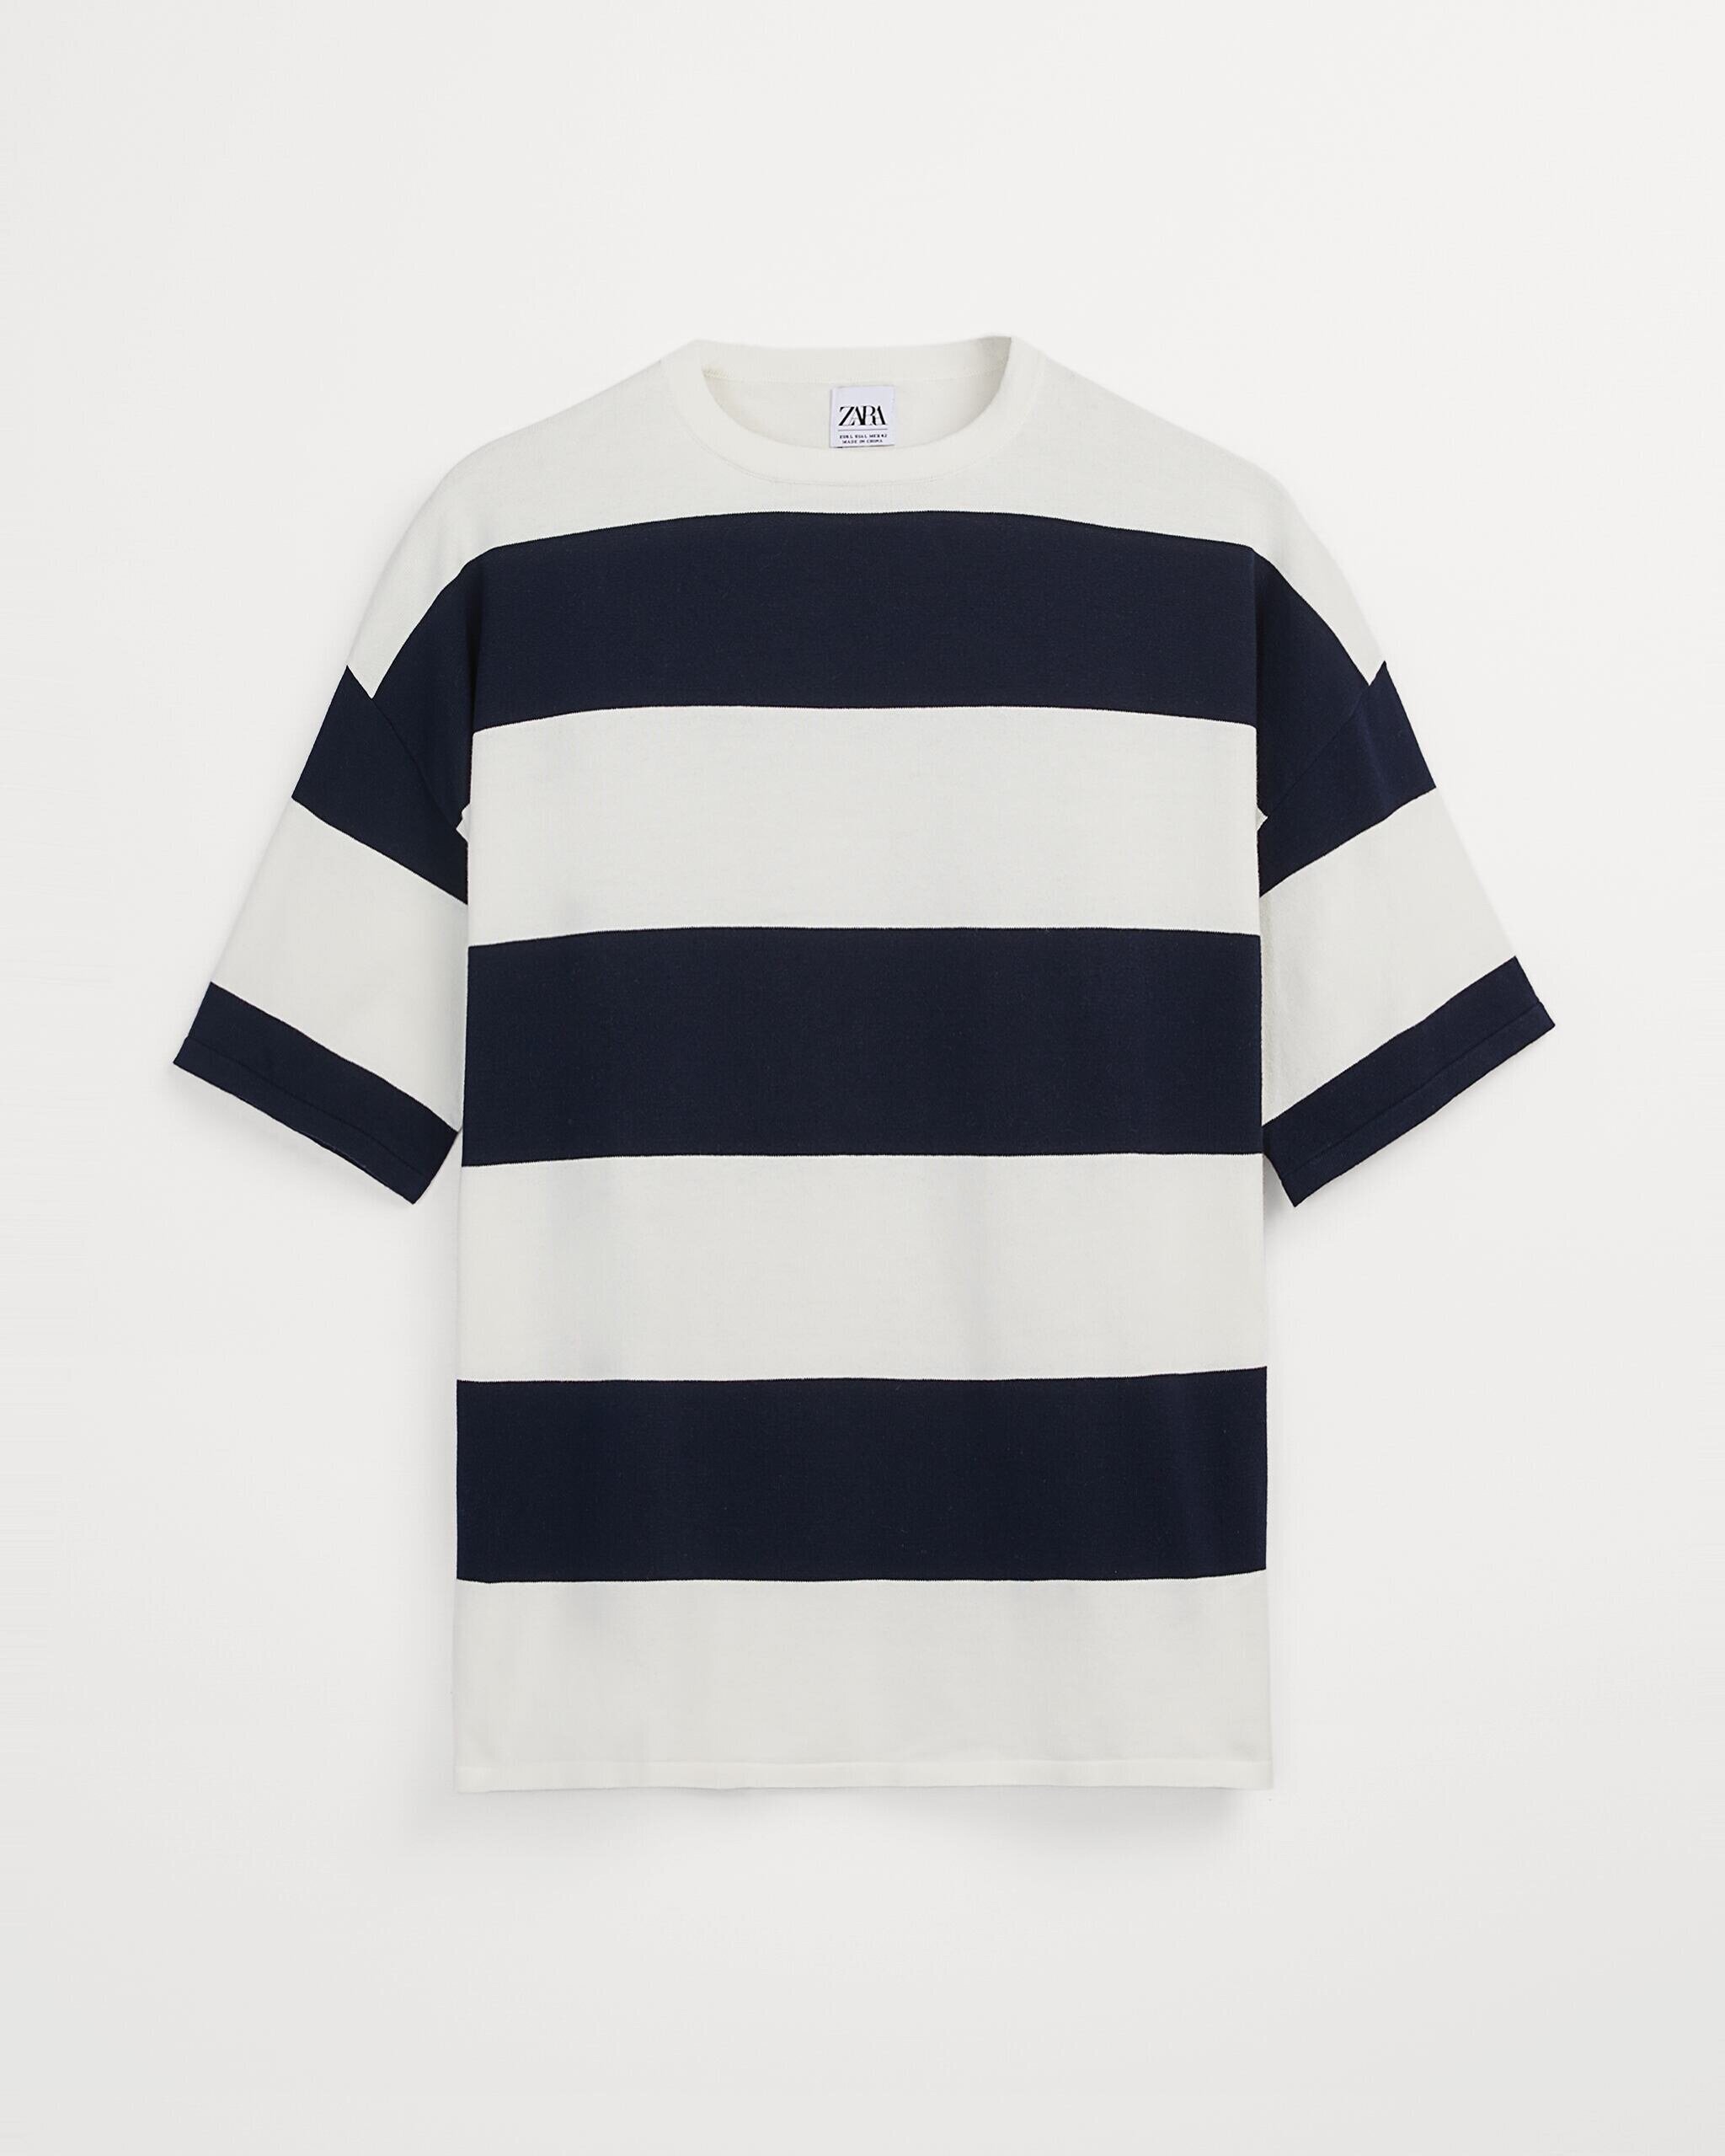 Nautical-inspired essentials for men is the surest bet to a stylish ...